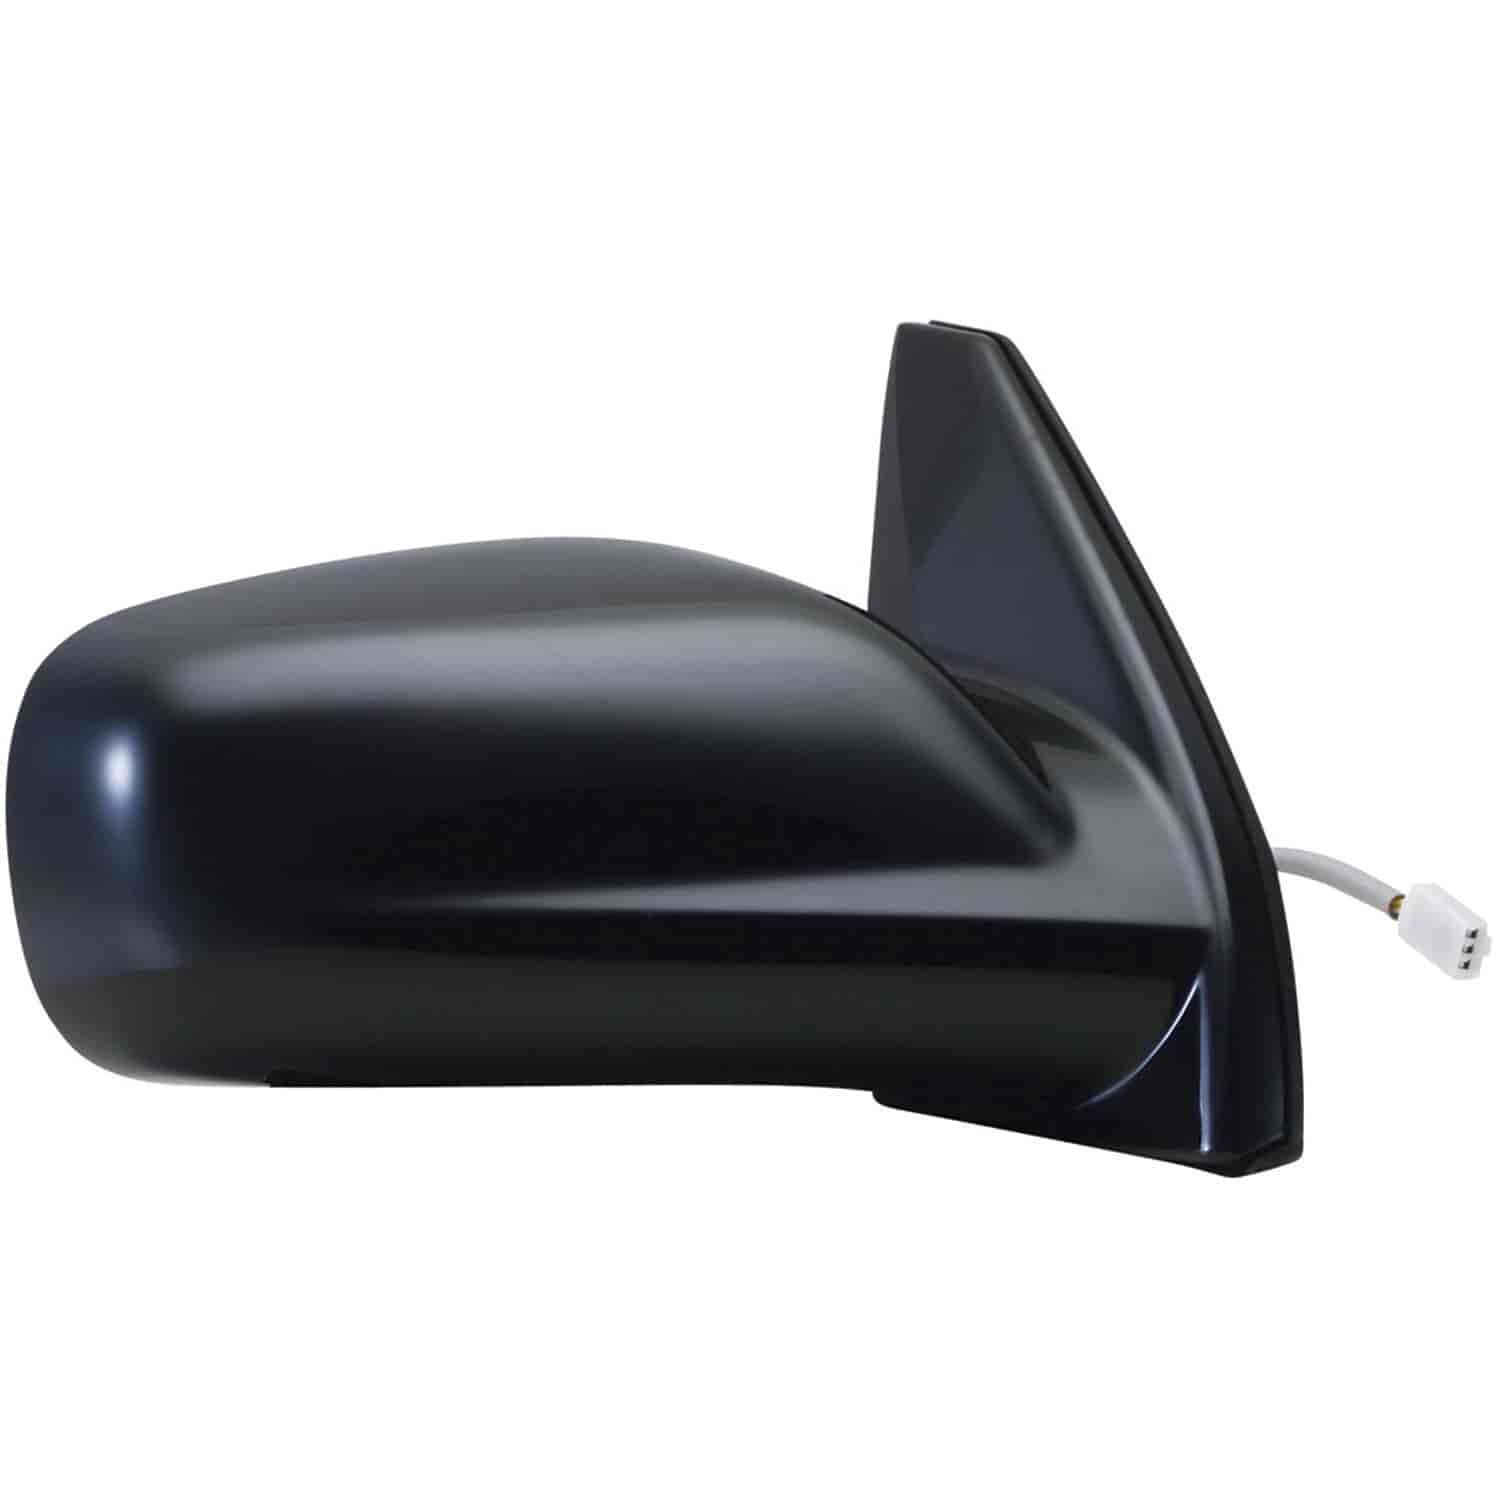 OEM Style Replacement mirror for 05-08 Pontiac Vibe passenger side mirror tested to fit and function